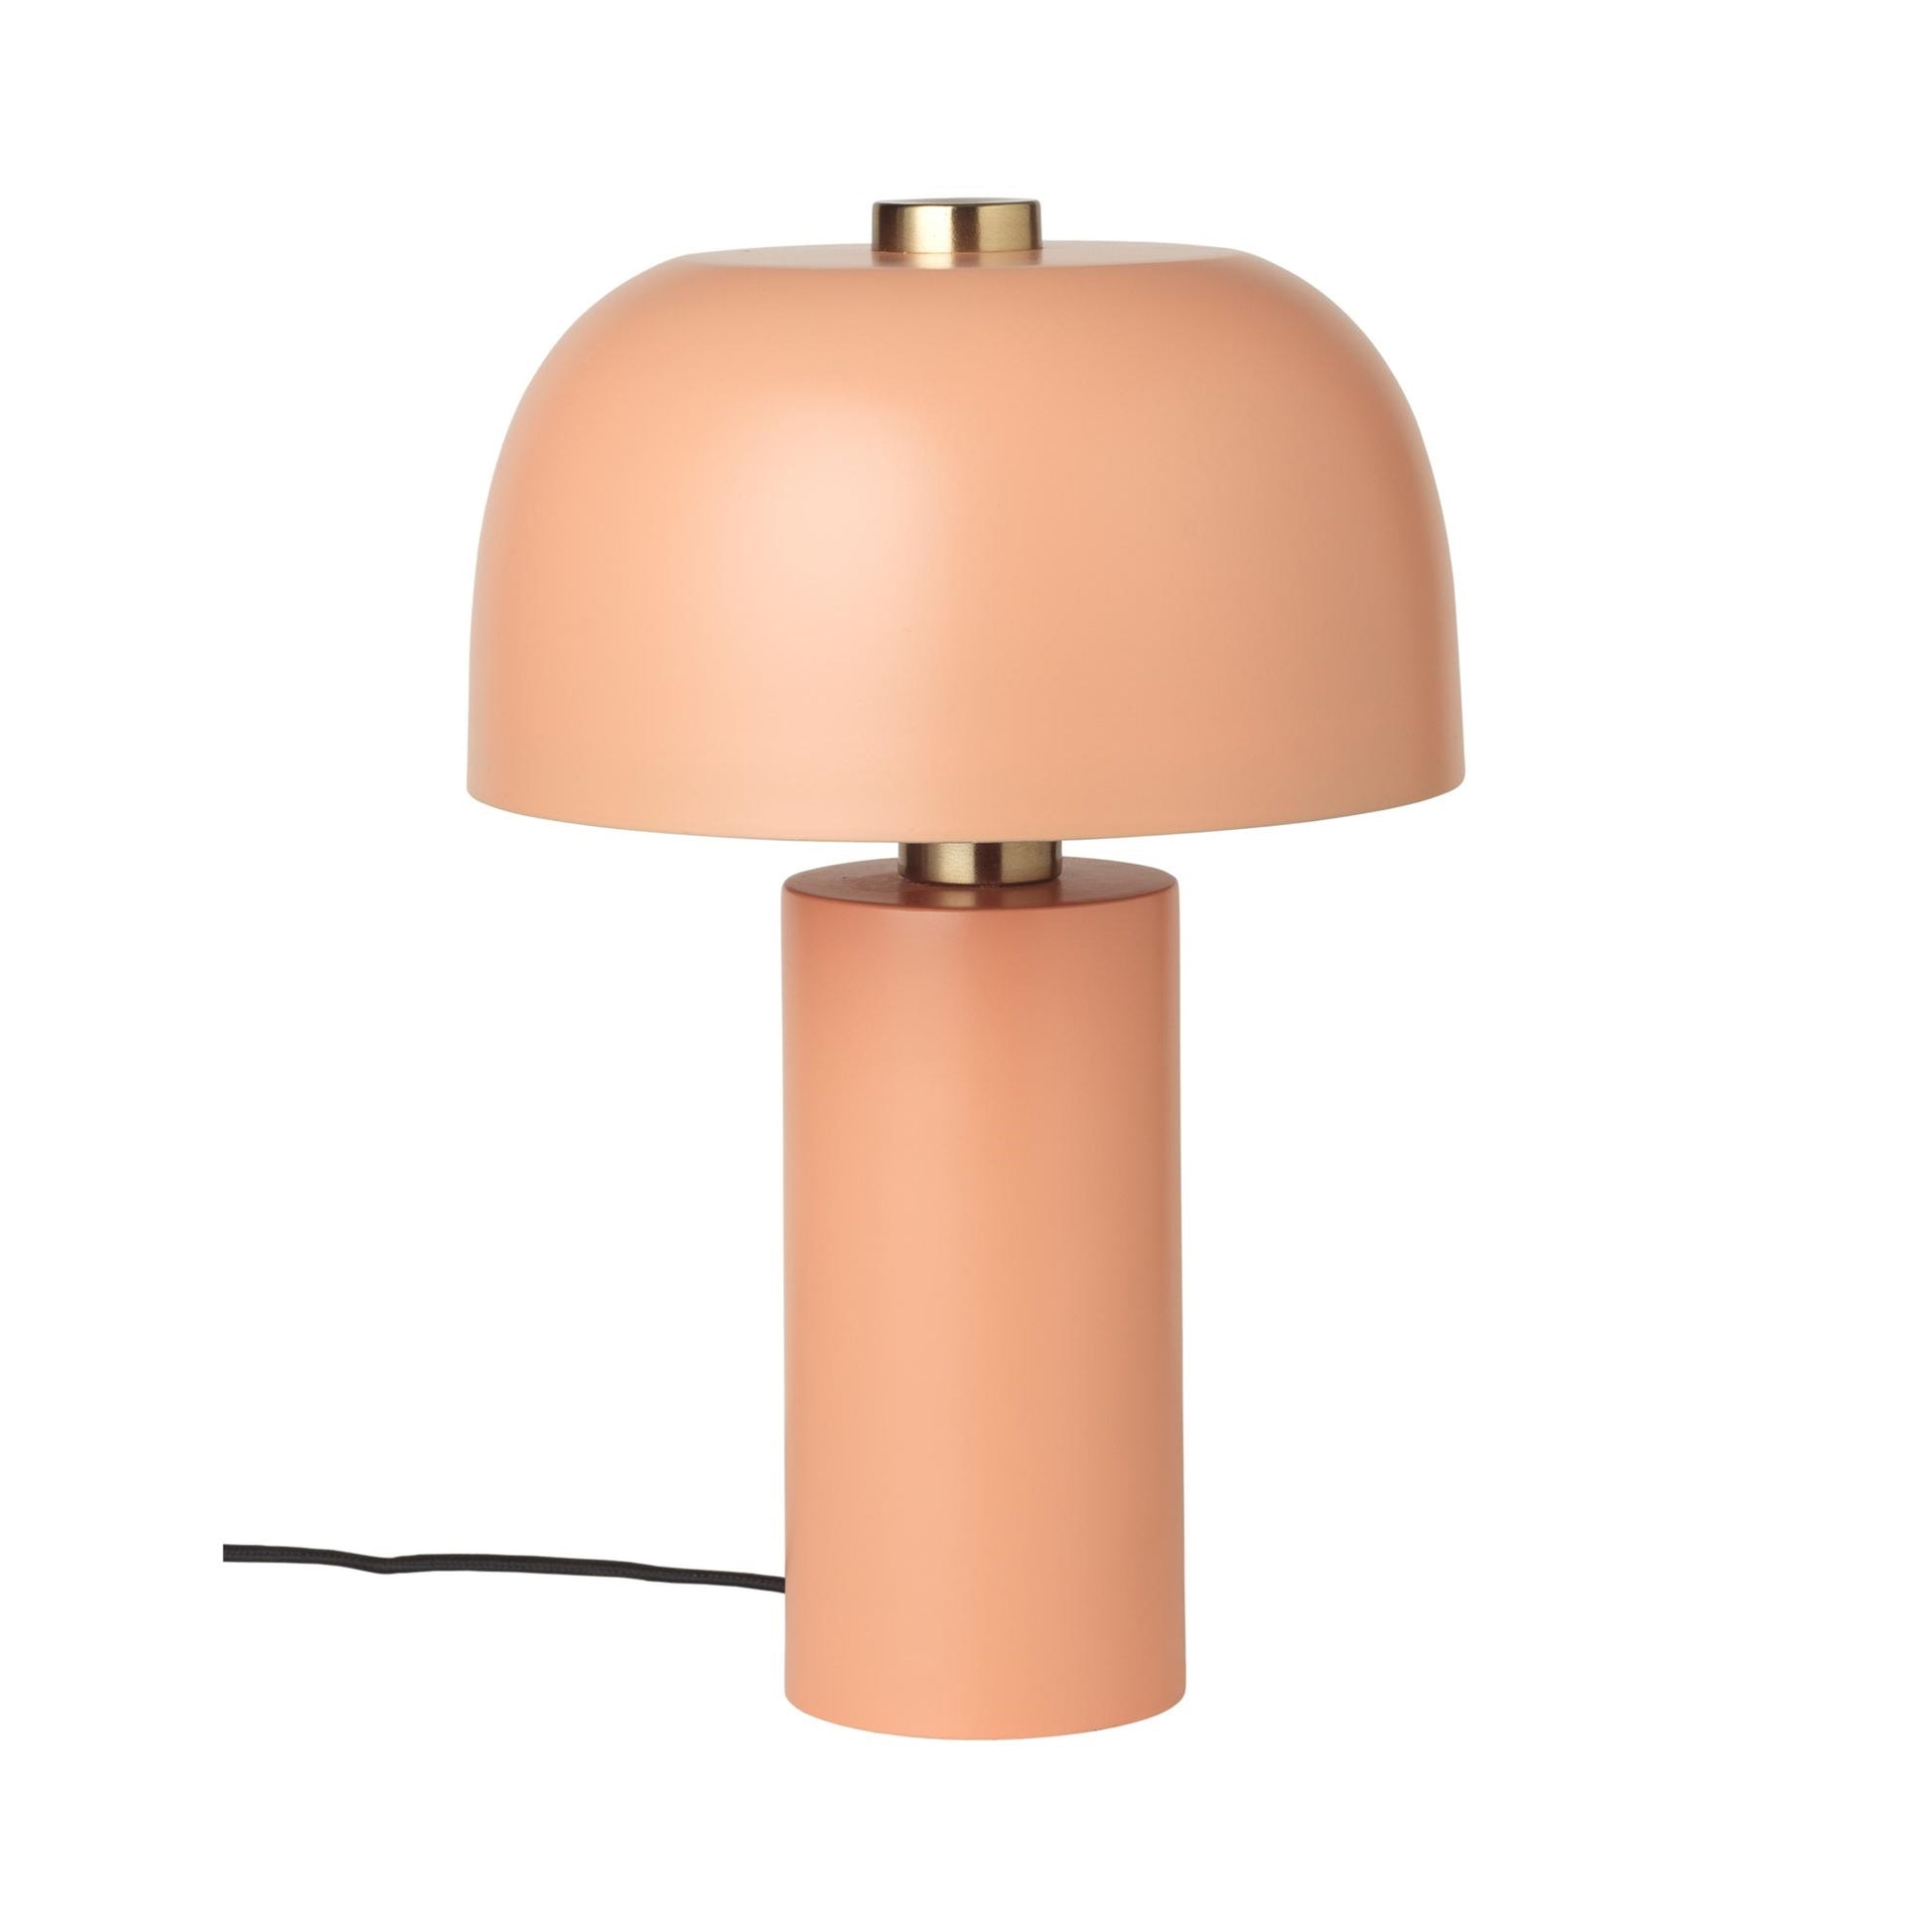 Lulu Table Lamp by Cozy Living #Cantaloupe